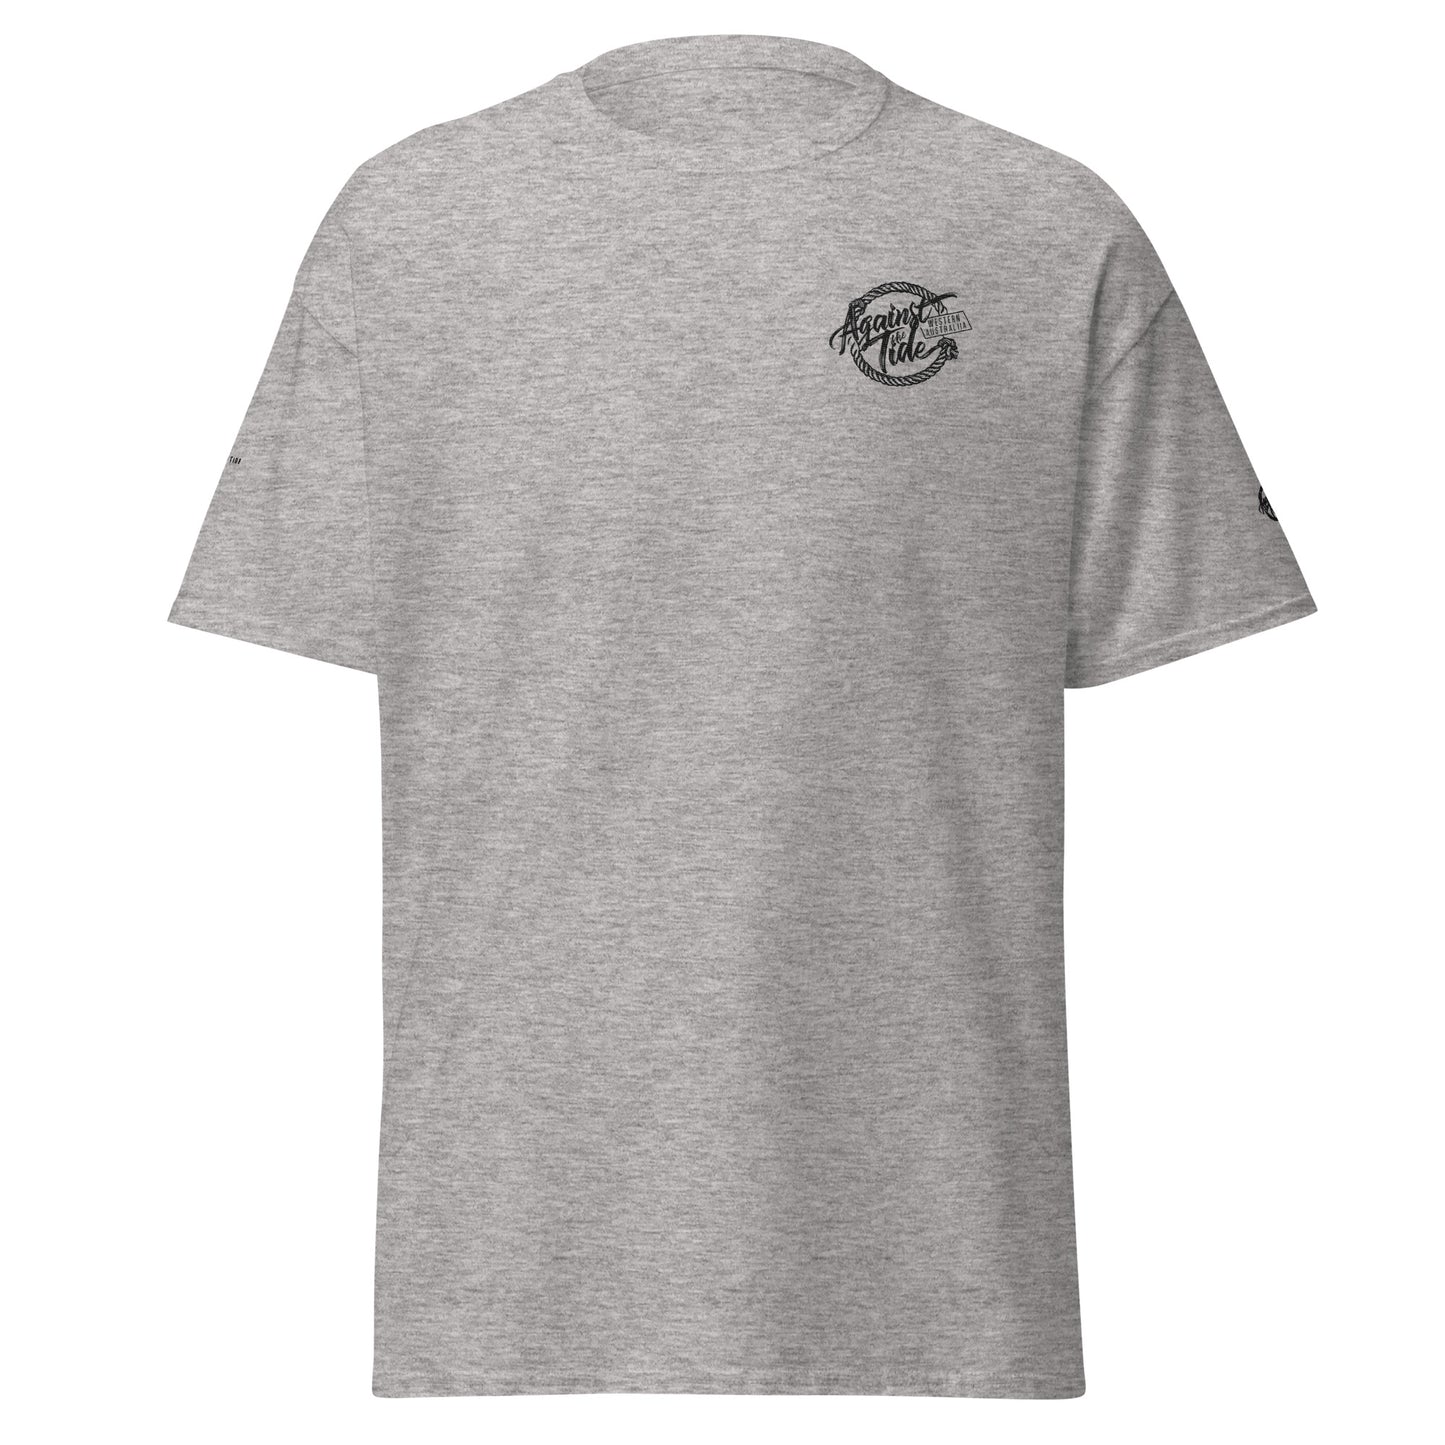 Against the Tide Embroided Mens classic tee